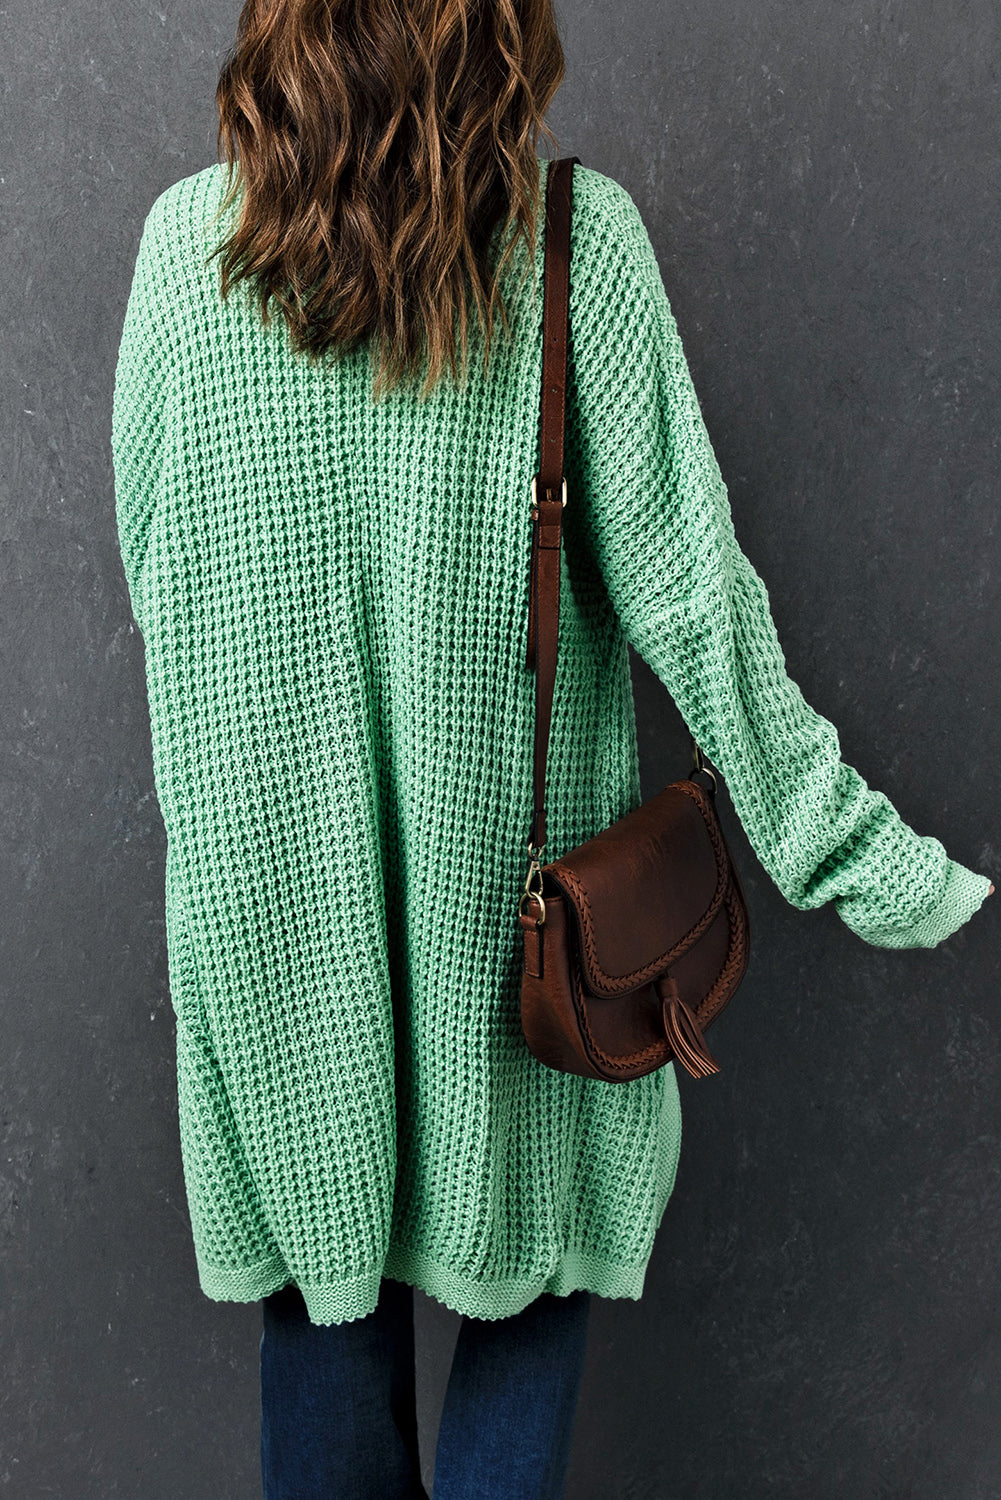 Green Long Line Open Front Knitted Cardigan with Pockets